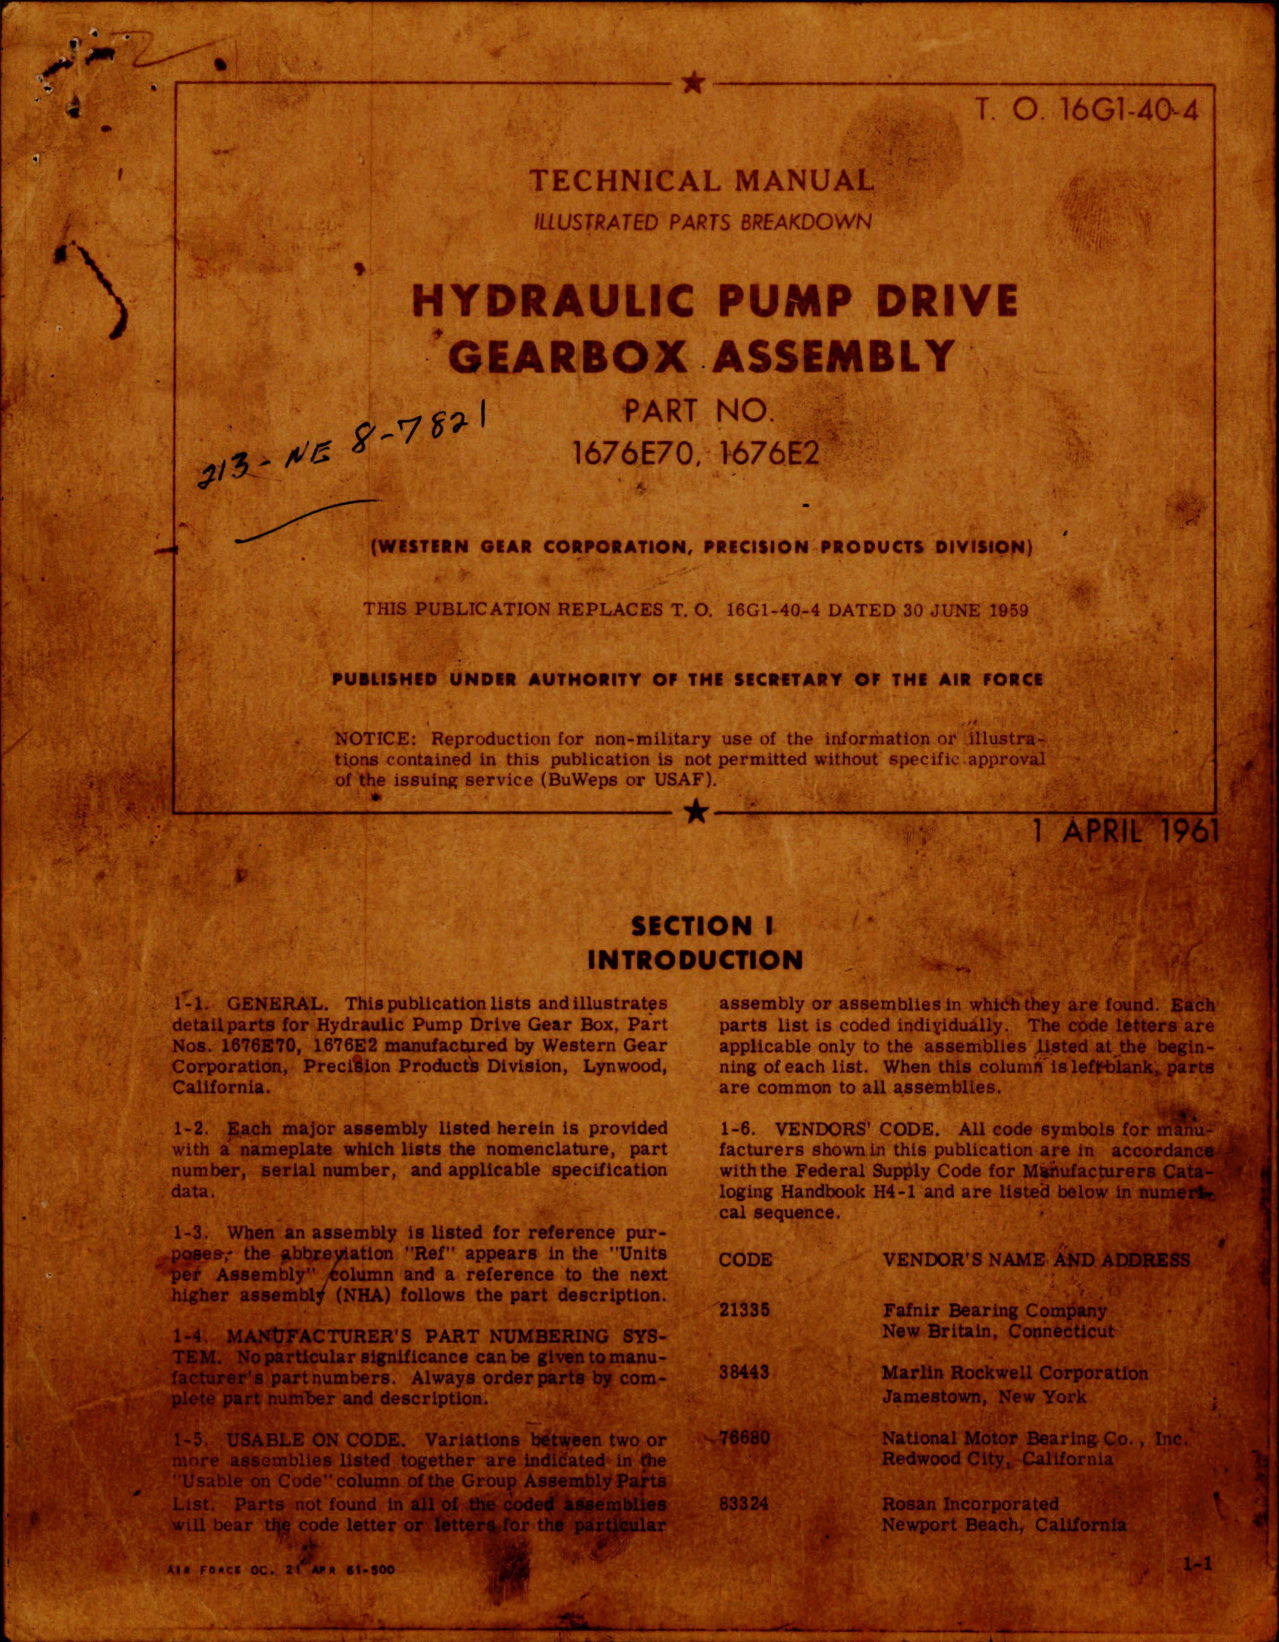 Sample page 1 from AirCorps Library document: Illustrated Parts Breakdown for Hydraulic Pump Drive Gearbox Assembly - Part 1676E70 and 1676E2 